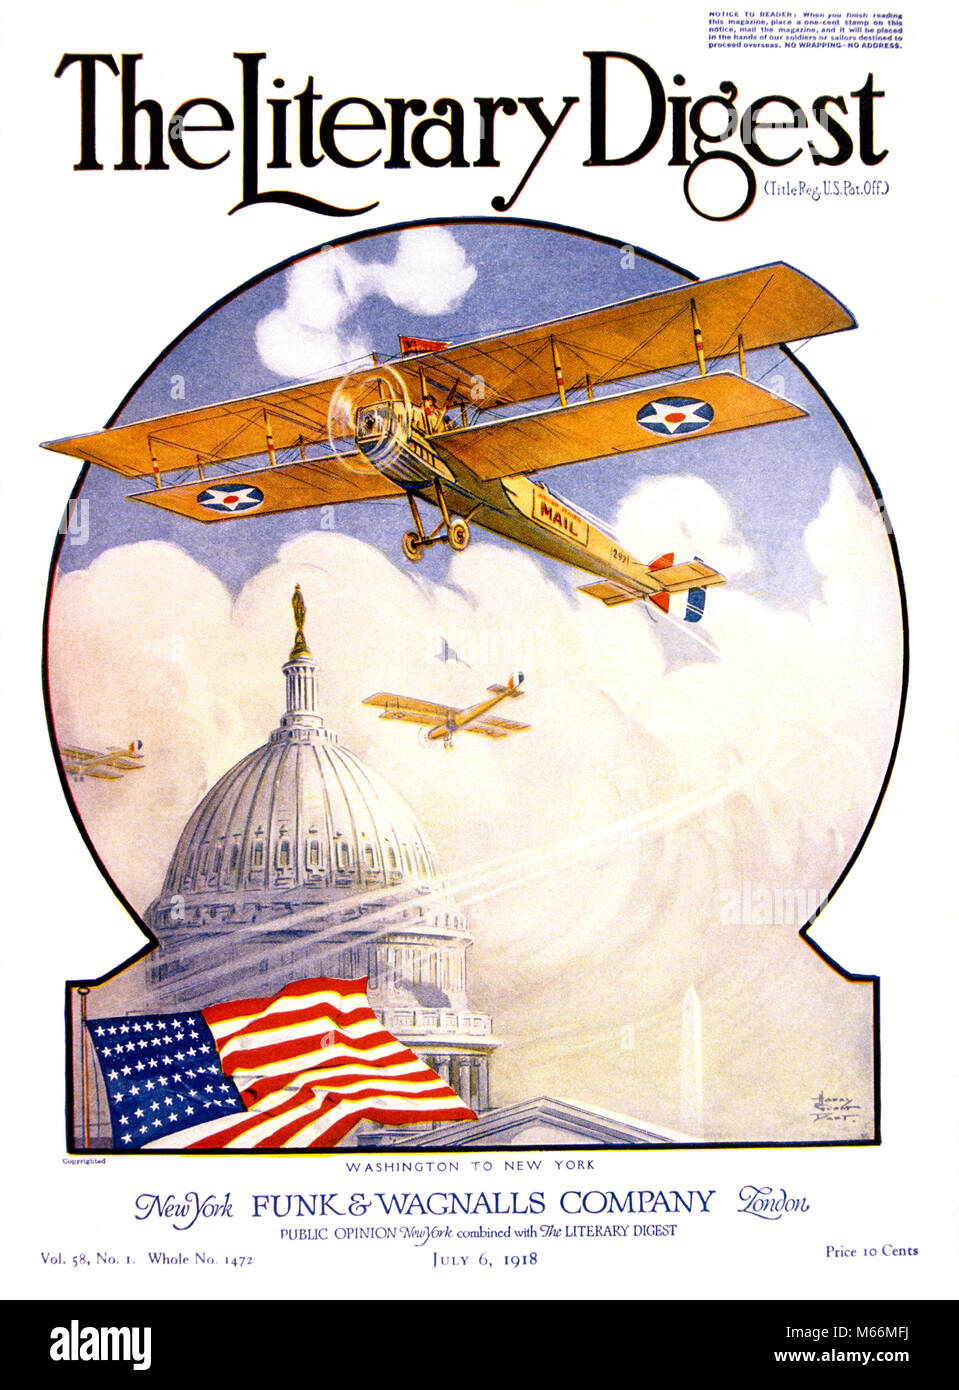 TWO ARMY BIPLANES OVER THE UNITED STATES CAPITOL BUILDING AND AMERICAN FLAG ONE CARRYING MAIL LITERARY DIGEST JULY 1918 - kh13520 NAW001 HARS ADVENTURE CAPITOL CUSTOMER SERVICE COURAGE EXCITEMENT EXTERIOR LOW ANGLE NOBODY POWERFUL PROGRESS PRIDE AVIATION POLITICS CONCEPTUAL PATRIOTIC PUBLICATION 1918 AIR MAIL AIRMAIL AIRPLANES AMERICAN FLAG BIPLANE BIPLANES LITERARY DIGEST OLD FASHIONED PAR AVION Stock Photo